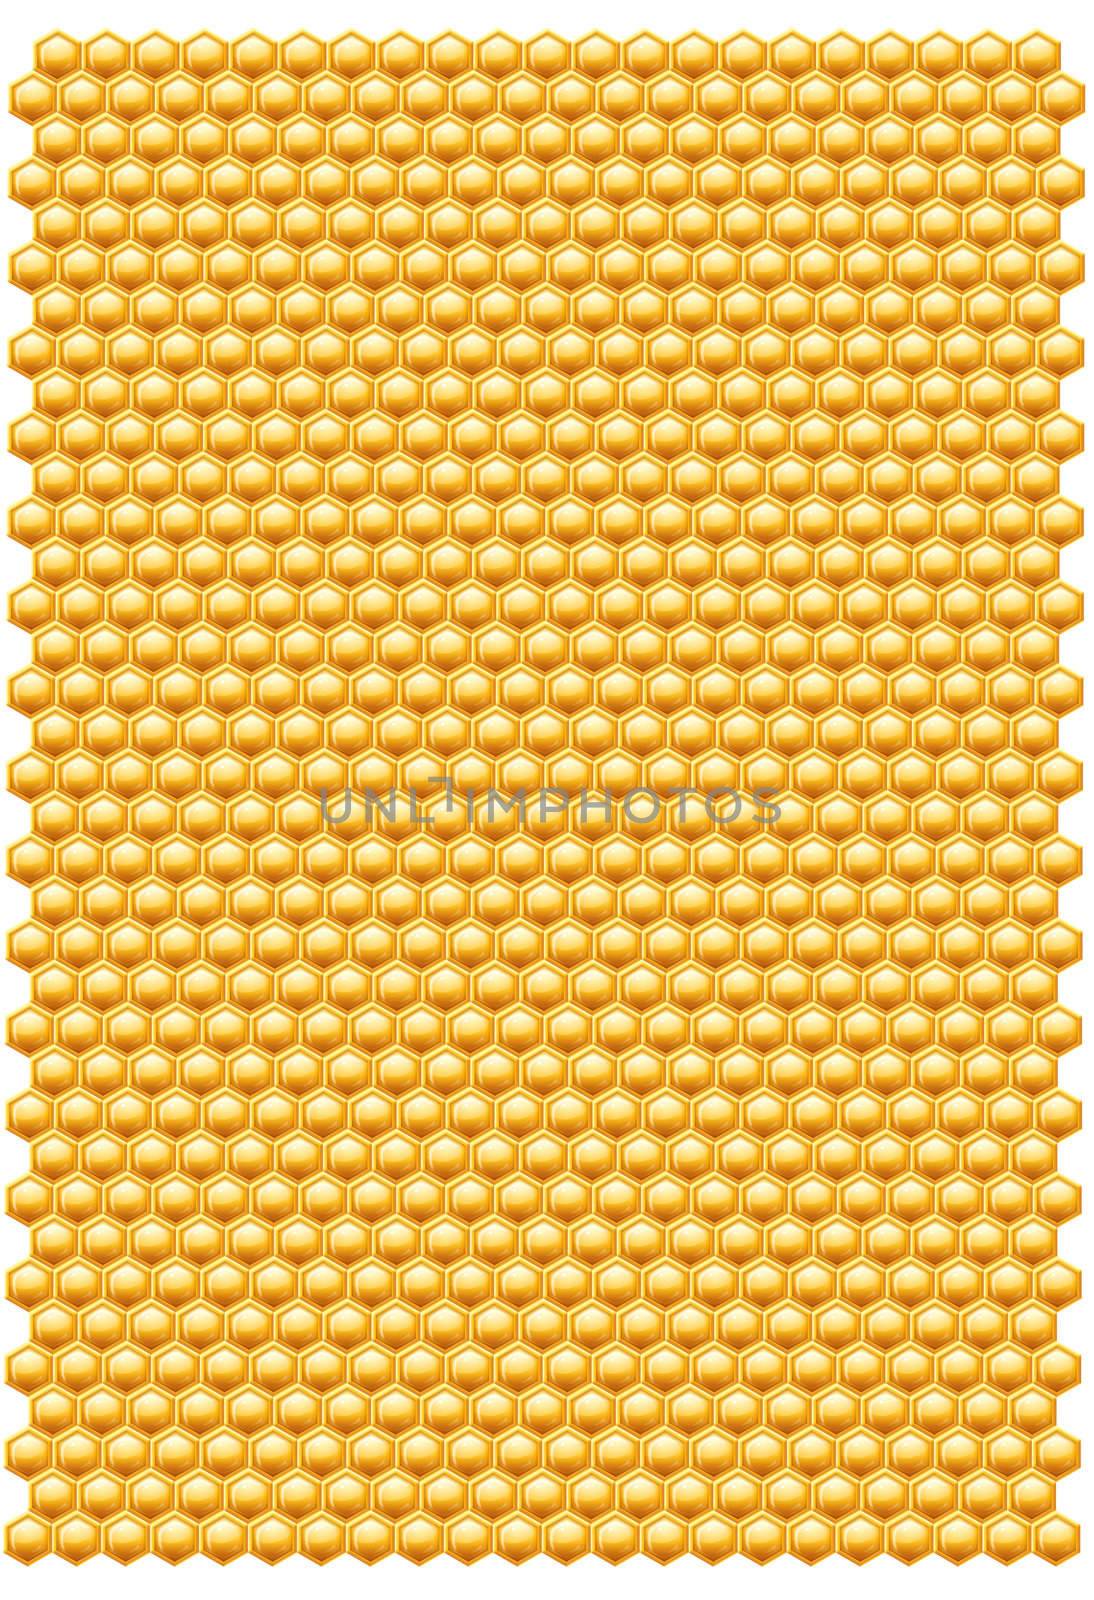 Bee honeycombs pattern isolated on a white background